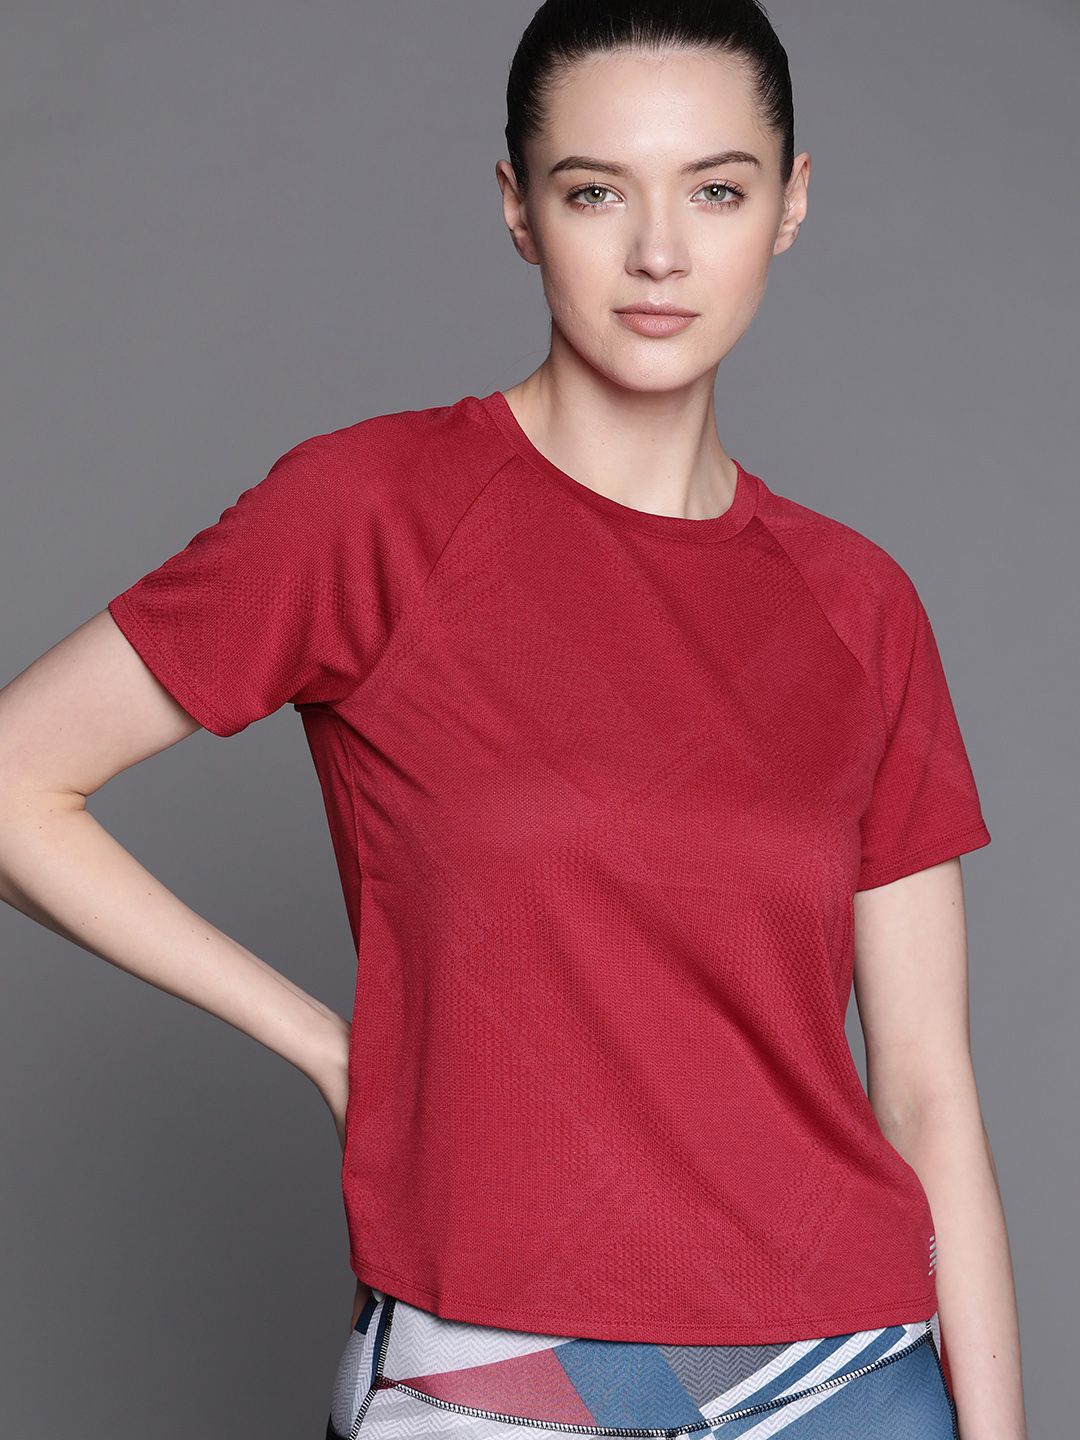 New Balance Women Maroon Solid T-shirt Price in India